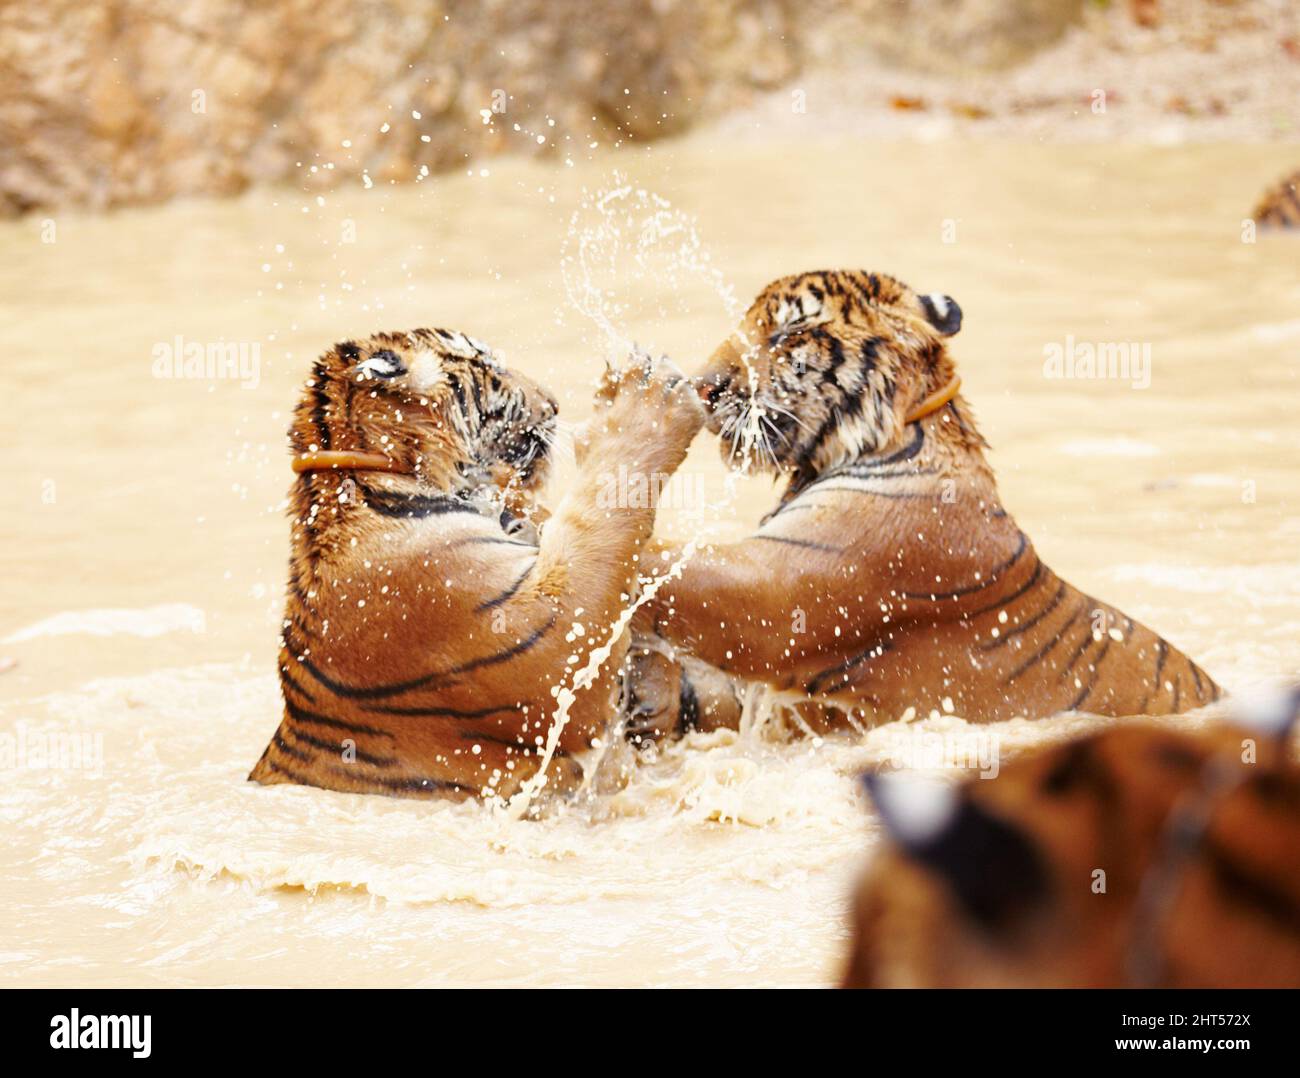 Two Indochinese tigers fighting playfully in the water. Playful Indochinese tigers fighting in the water. Stock Photo